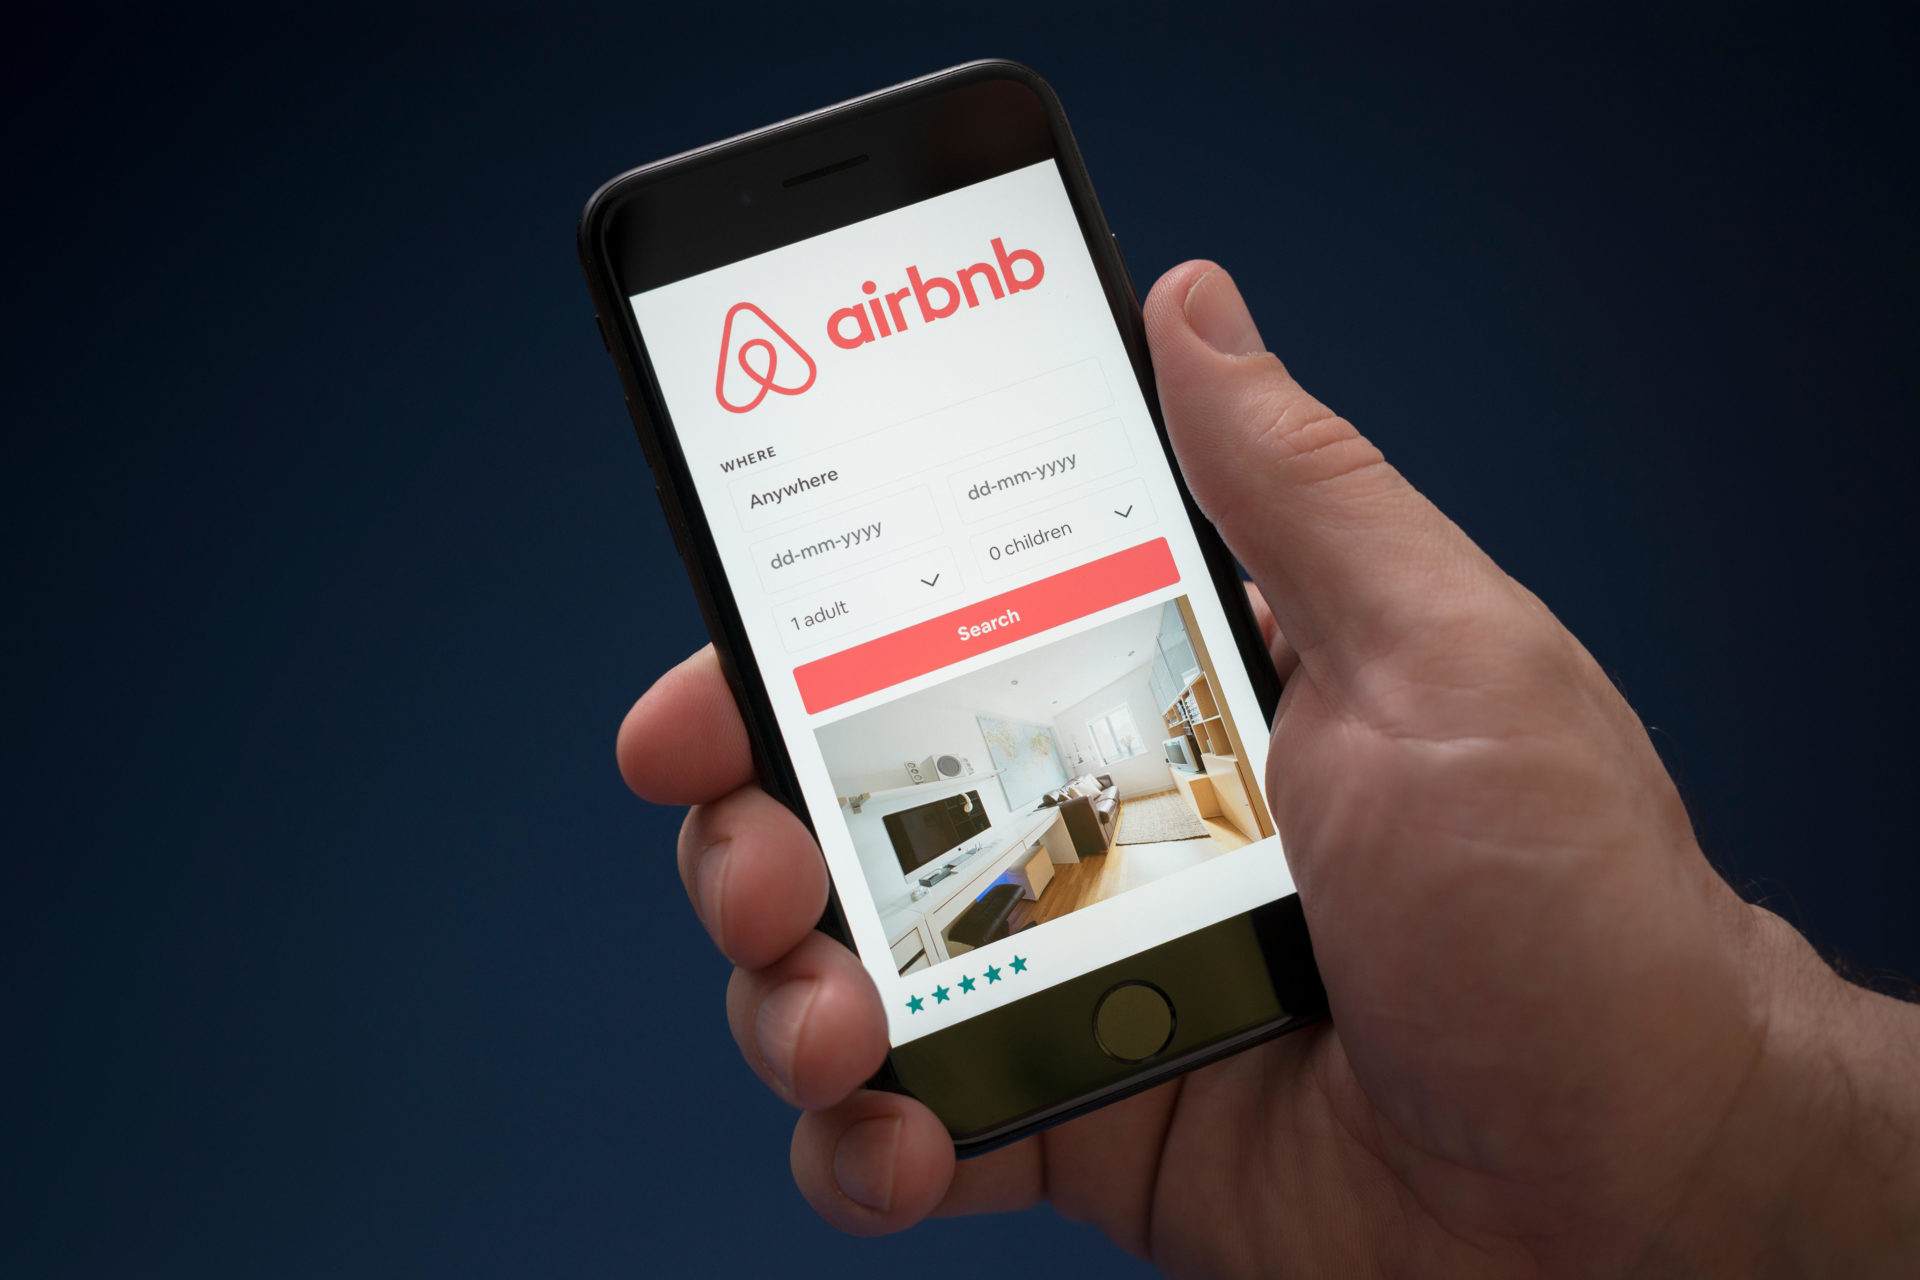 A man looks at his phone which displays the Airbnb logo